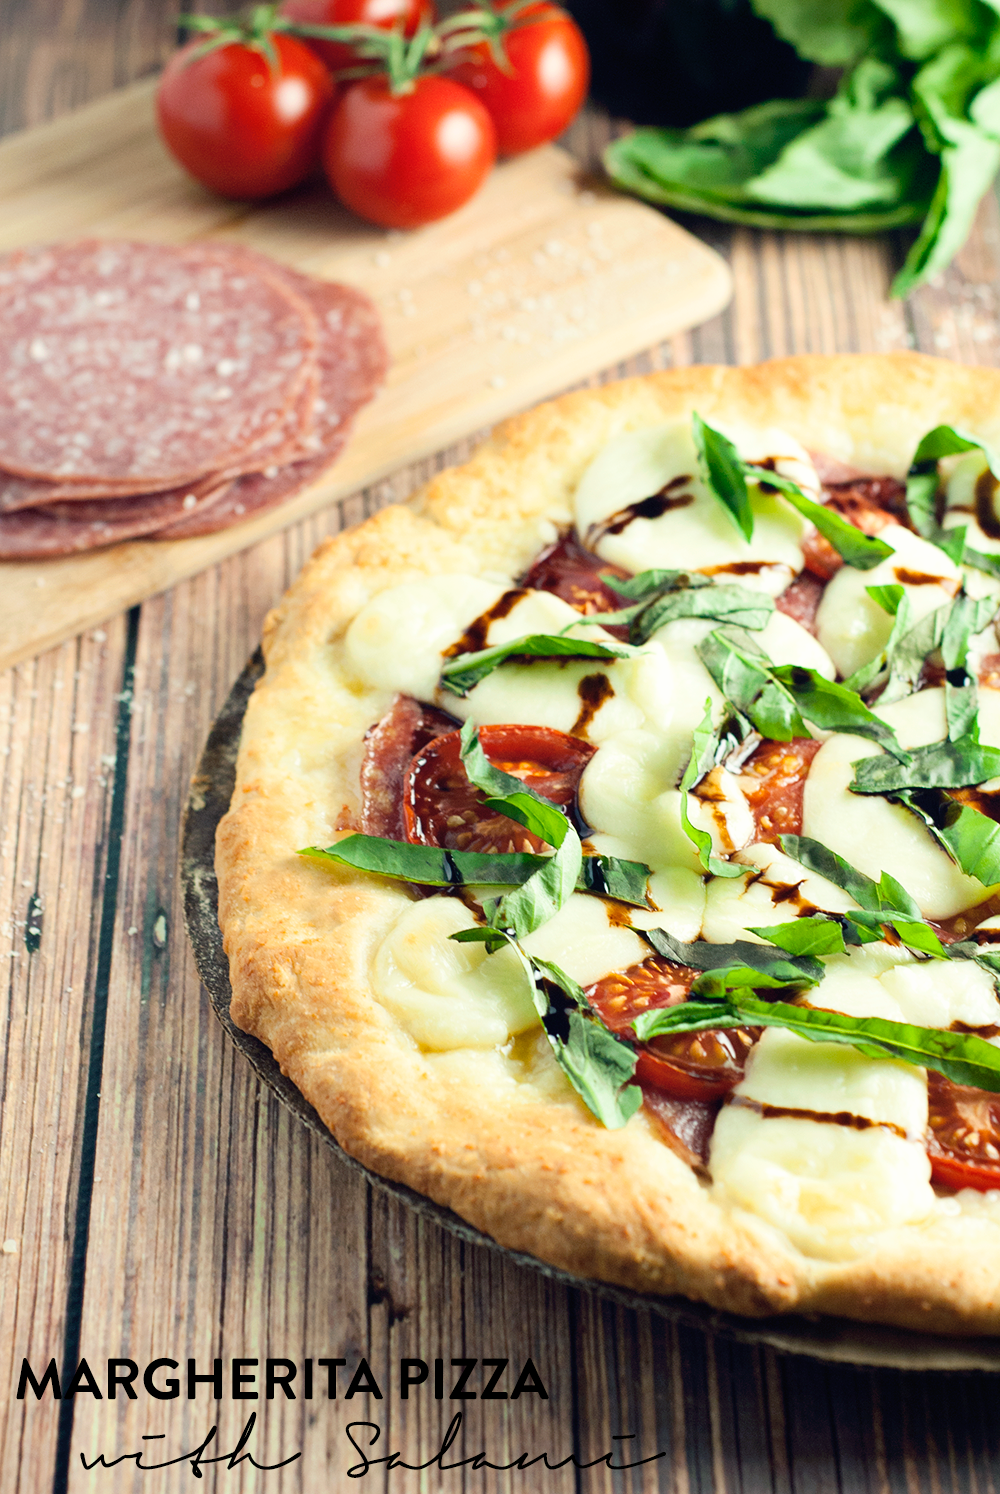 This Margherita Pizza with Salami is the real deal of delicious; a must eat tonight!